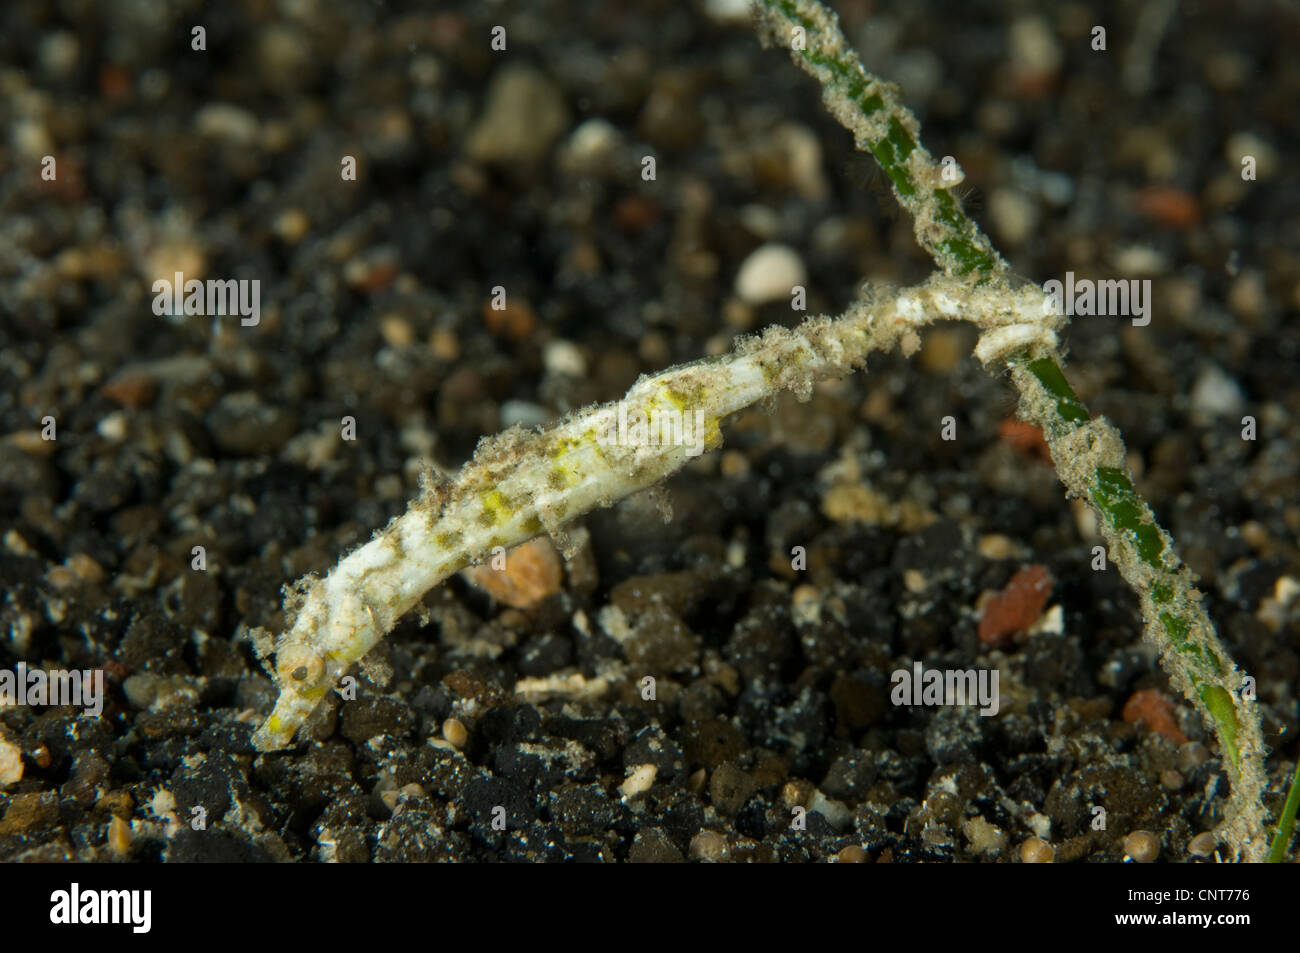 Shortpouch pygmy pipehorse on volcanic sand clinging to sea grass taken at Witu Islands, Papua New Guinea. Stock Photo